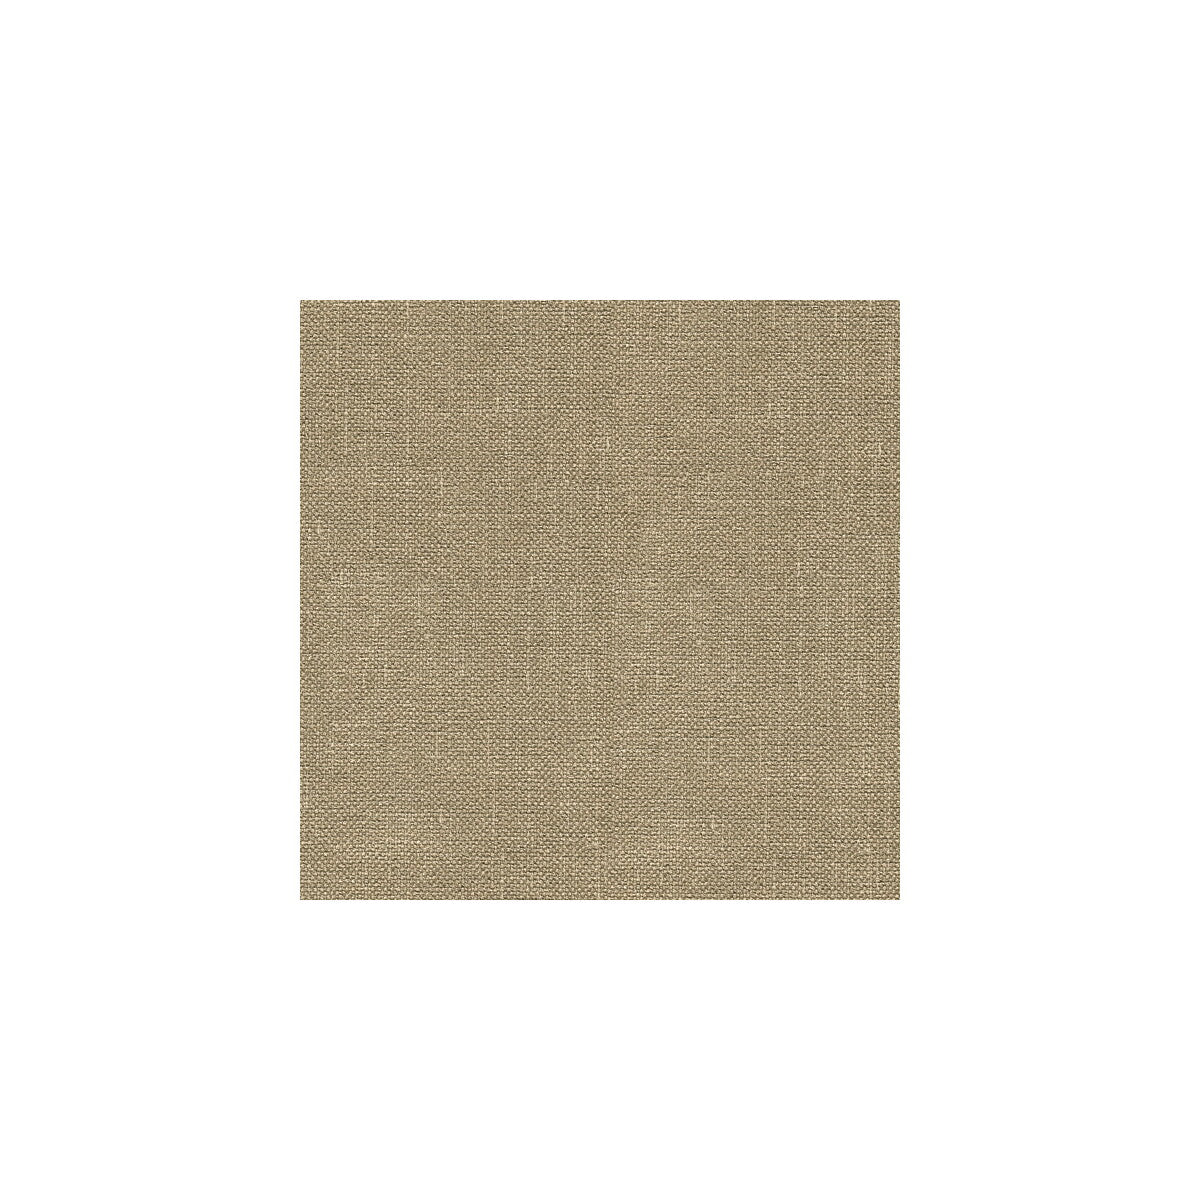 Kravet Basics fabric in 33120-611 color - pattern 33120.611.0 - by Kravet Basics in the Perfect Plains collection